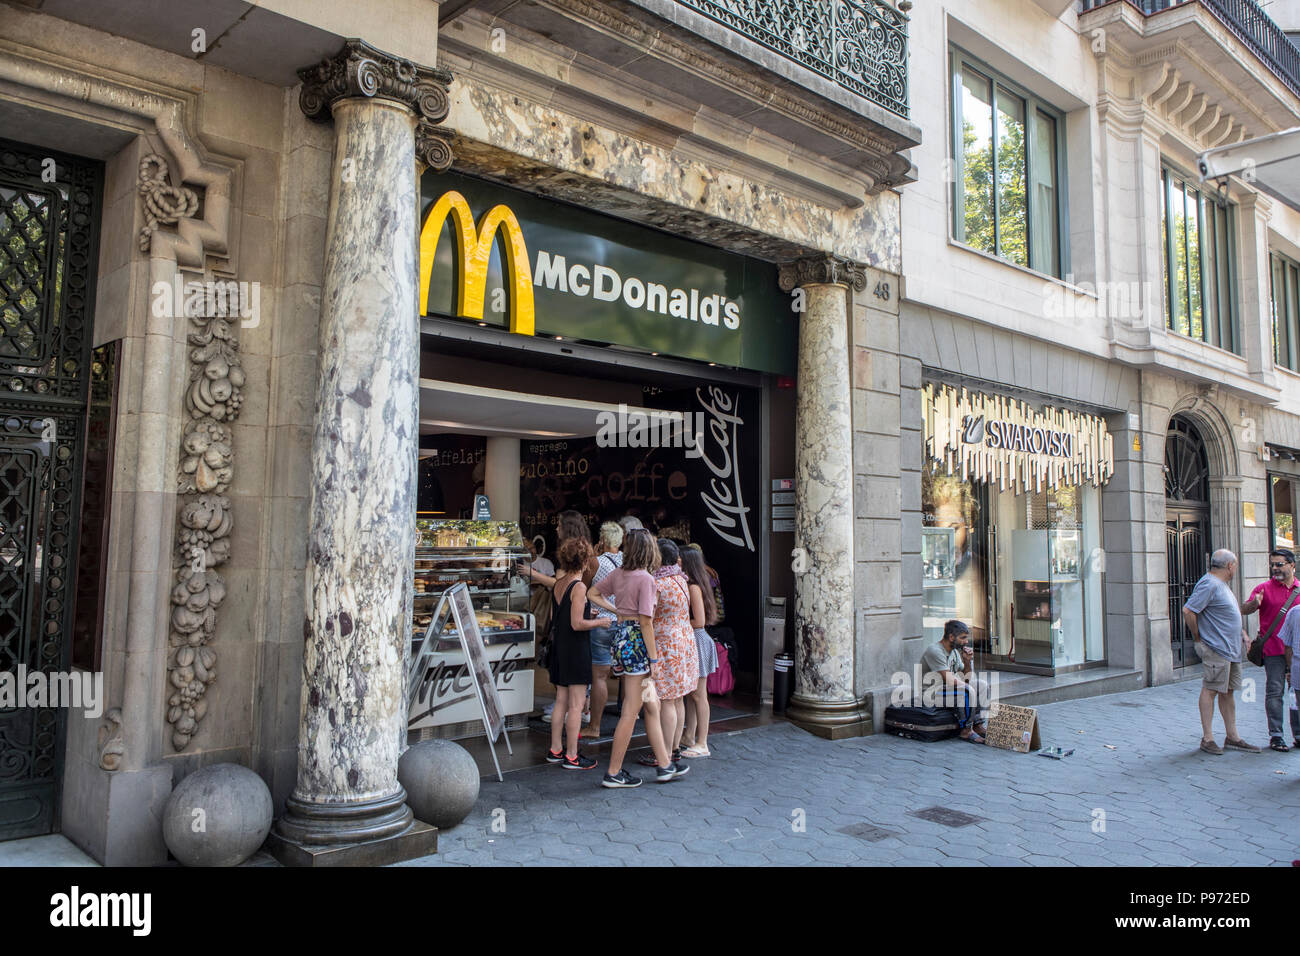 Spain Mcdonalds High Resolution Stock Photography and Images - Alamy